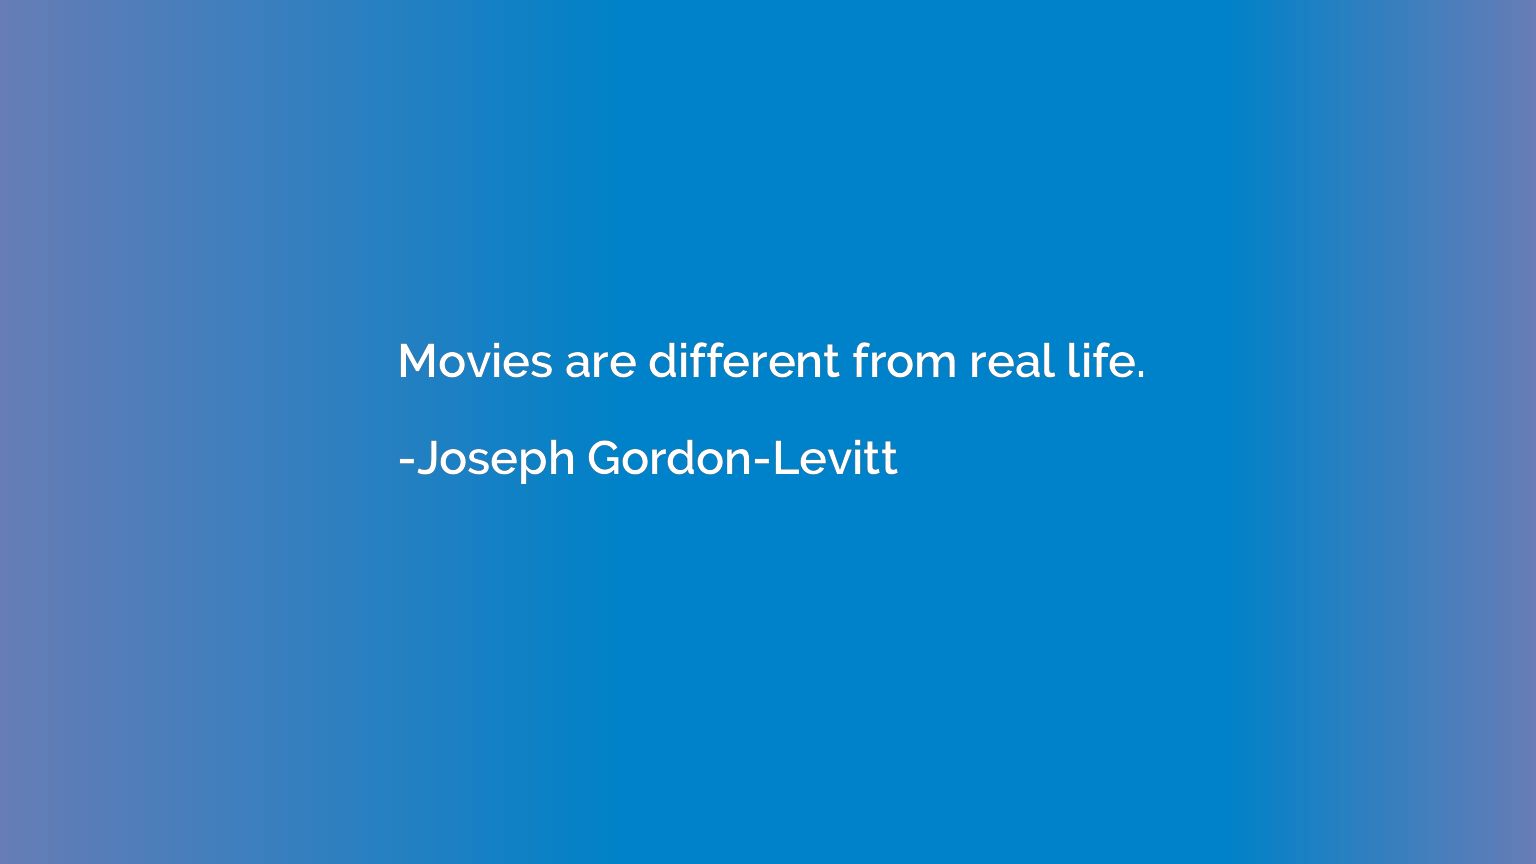 Movies are different from real life.